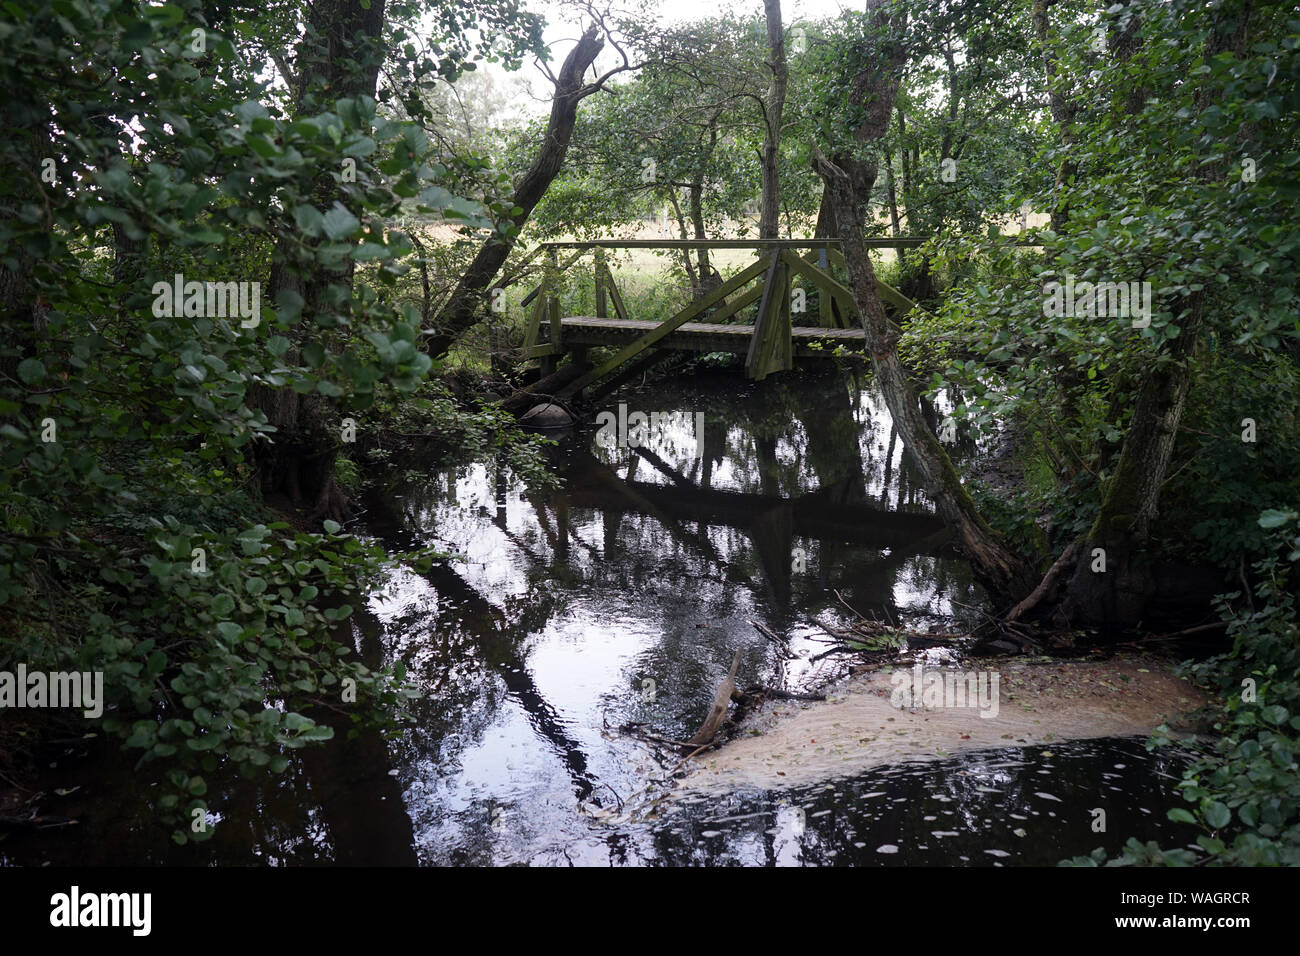 River and wooden bridge in forest in Denmark Stock Photo